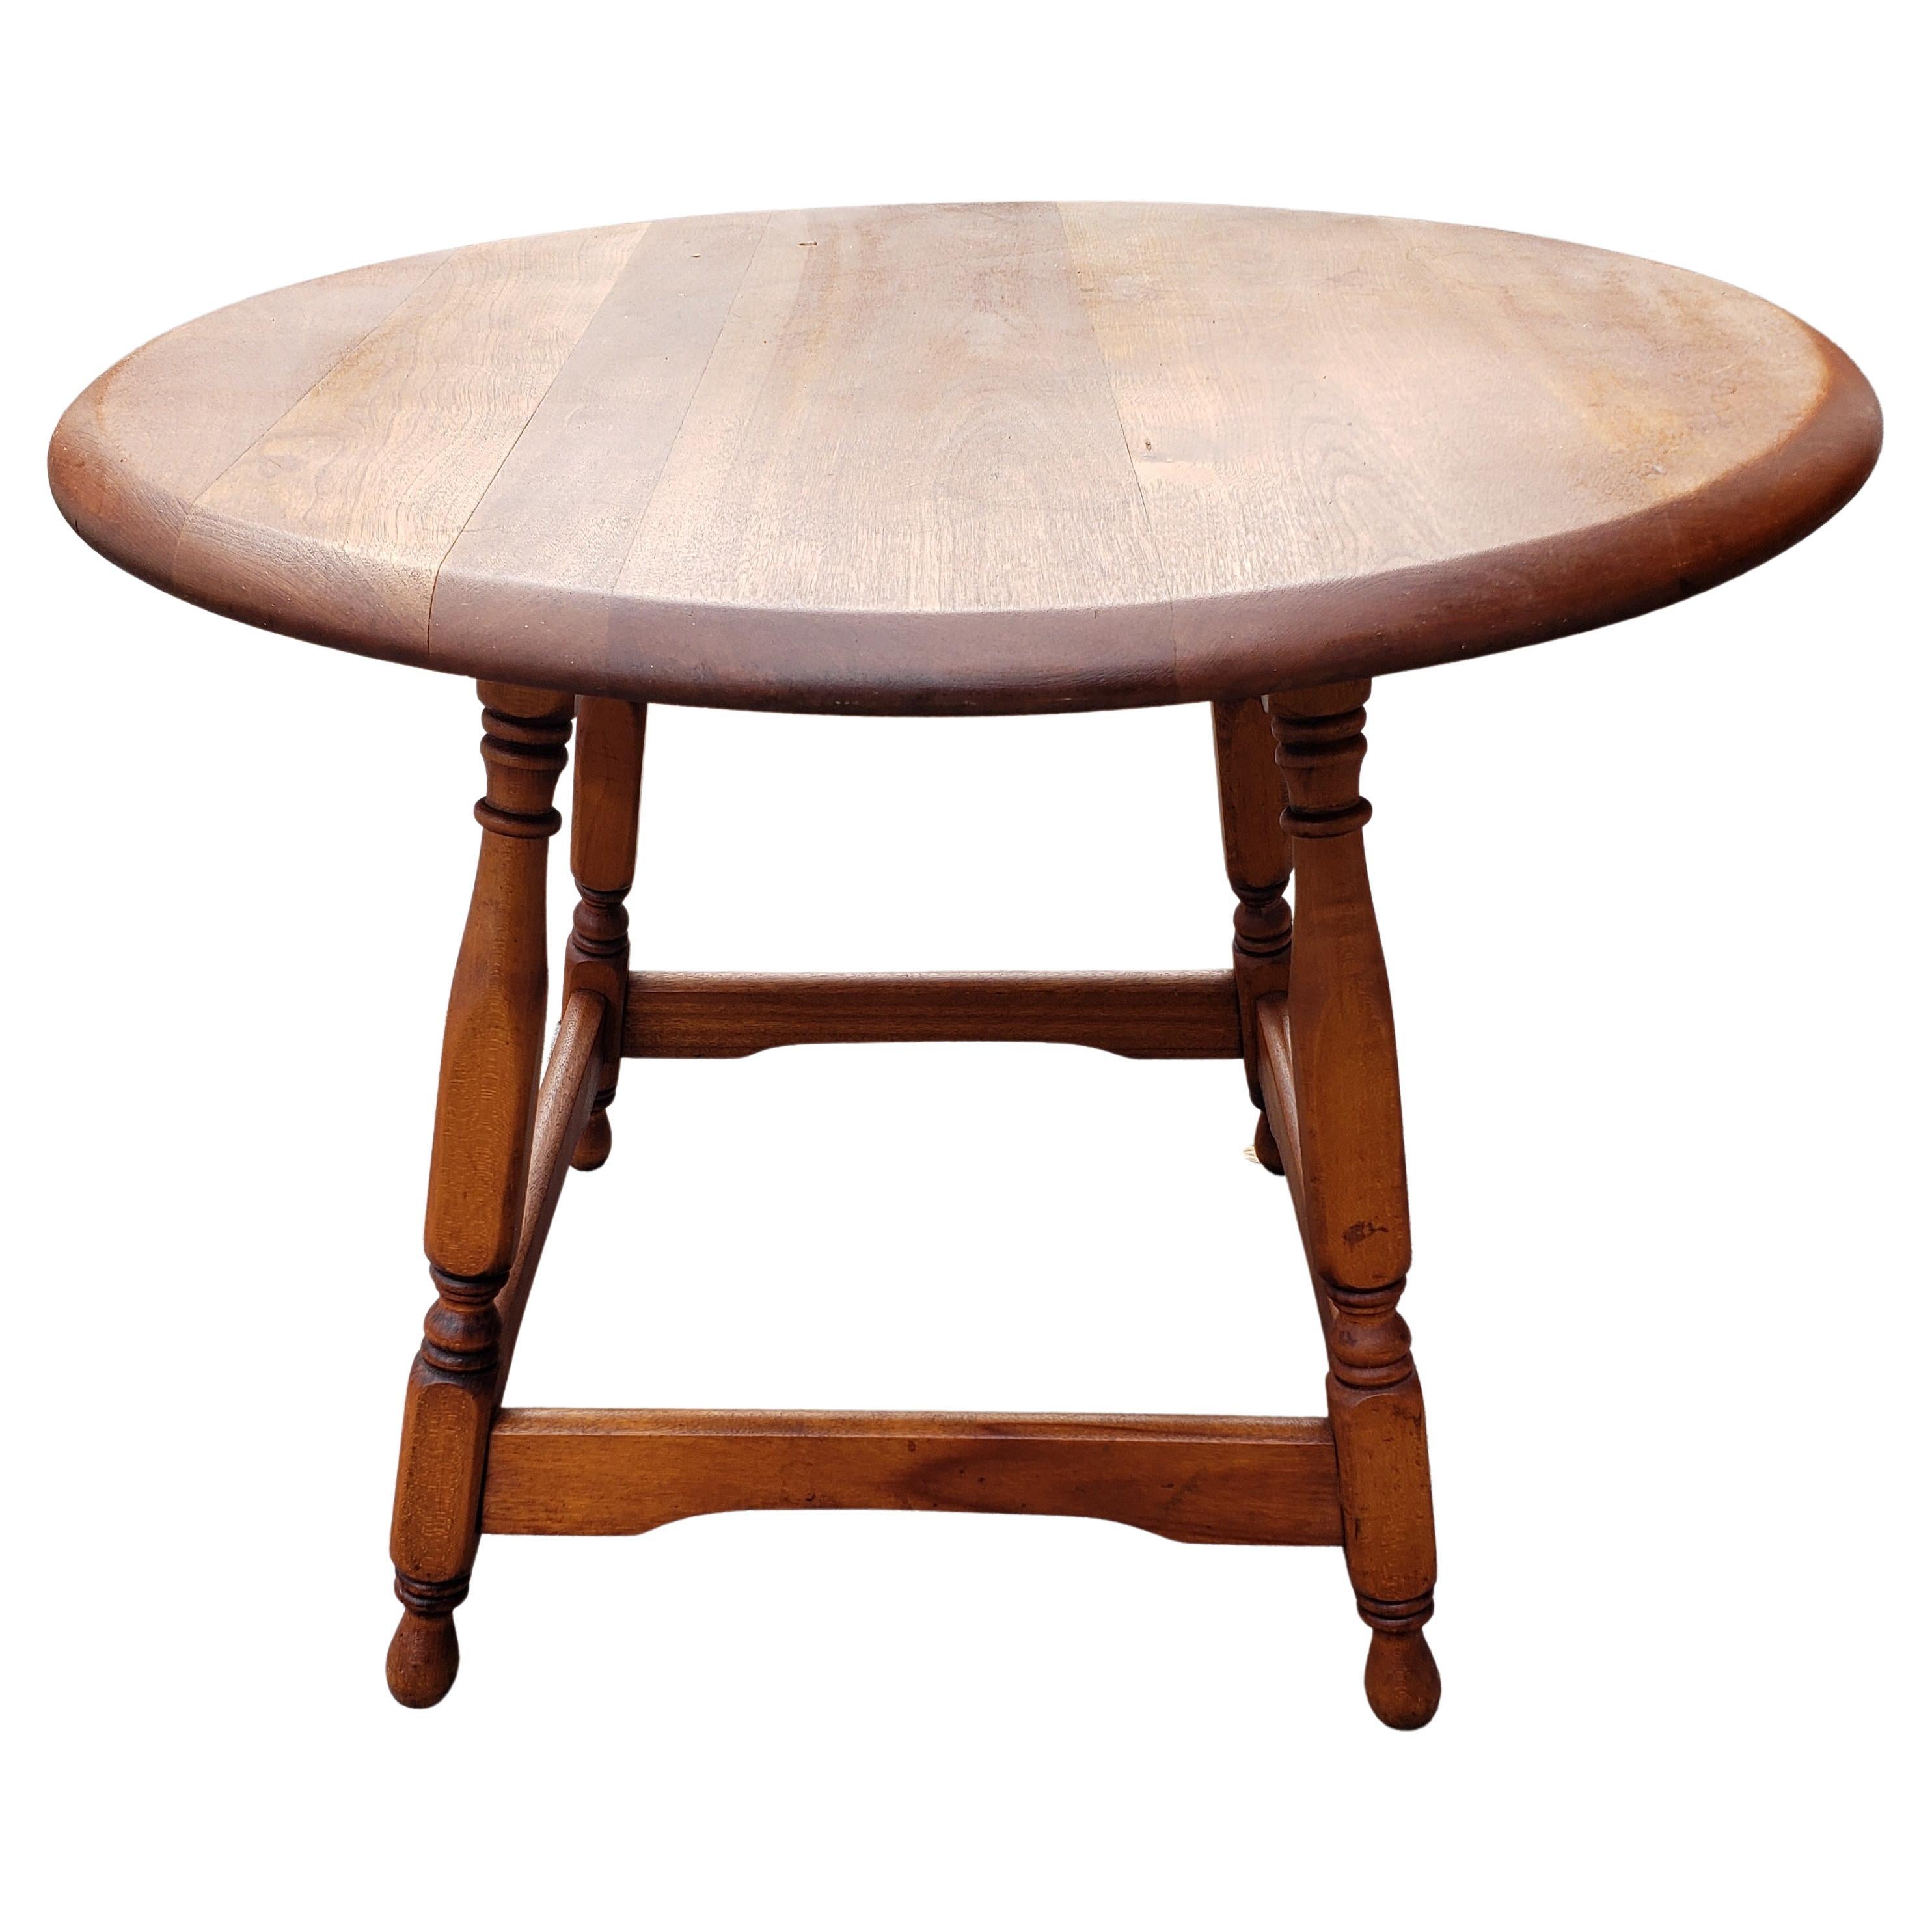 Woodwork Amish Hand Crafted Solid Red Oak Desert Table Side Table, Circa 1970s For Sale